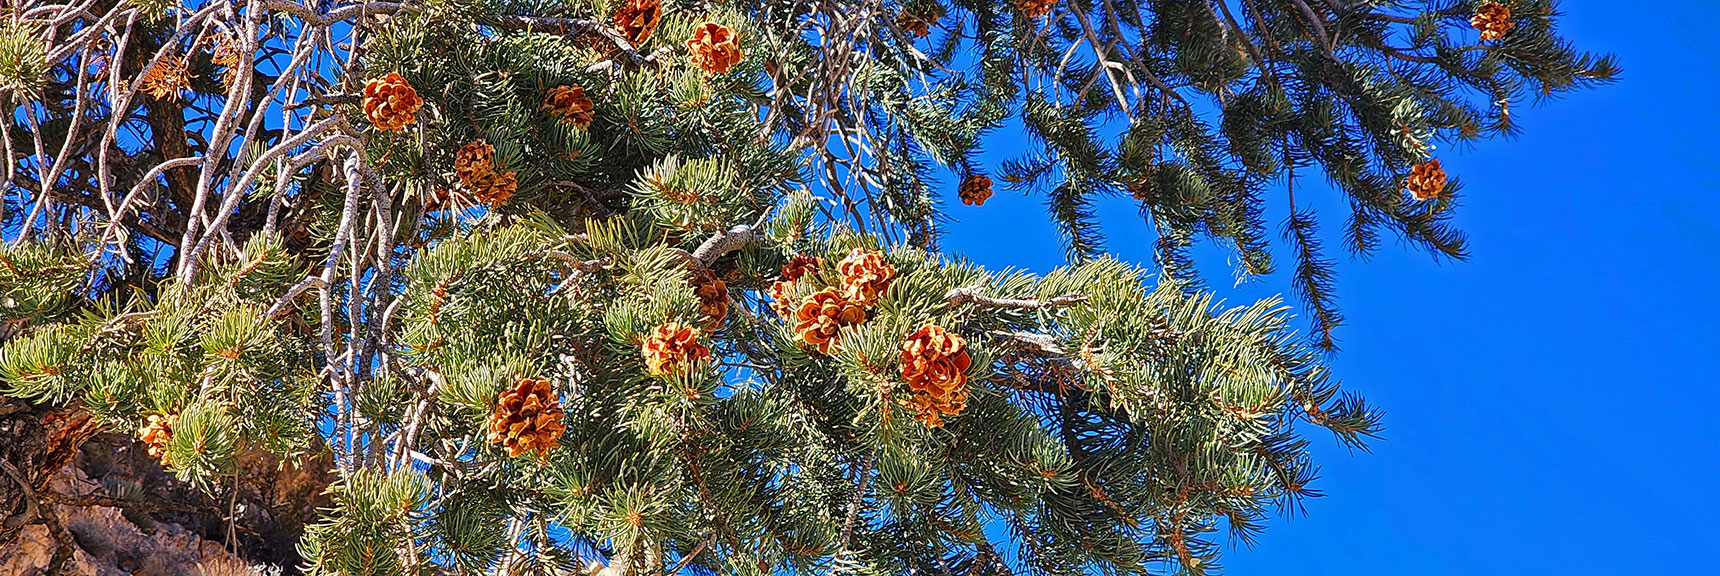 Note Color Variety from Pinecones to Pine Needles to Blue Sky | Pink Goblin Loop | Calico Basin, Nevada